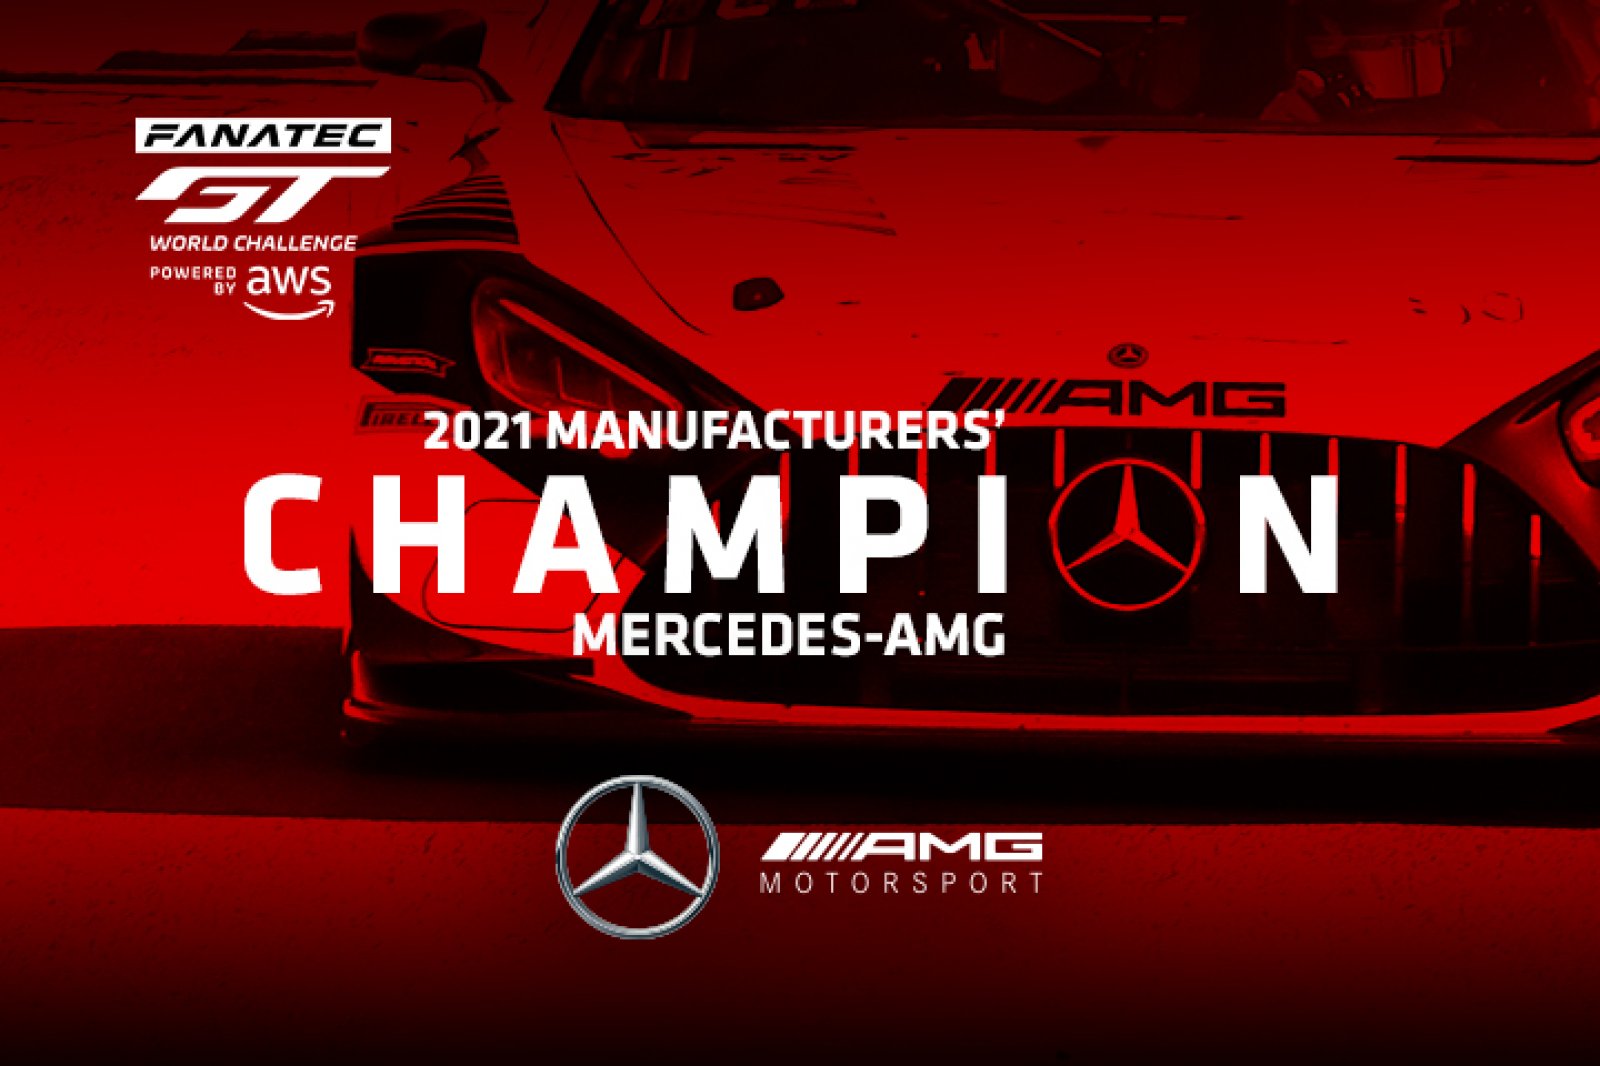 Mercedes-AMG earns global Fanatec GT World Challenge Powered by AWS crown for third season in succession 